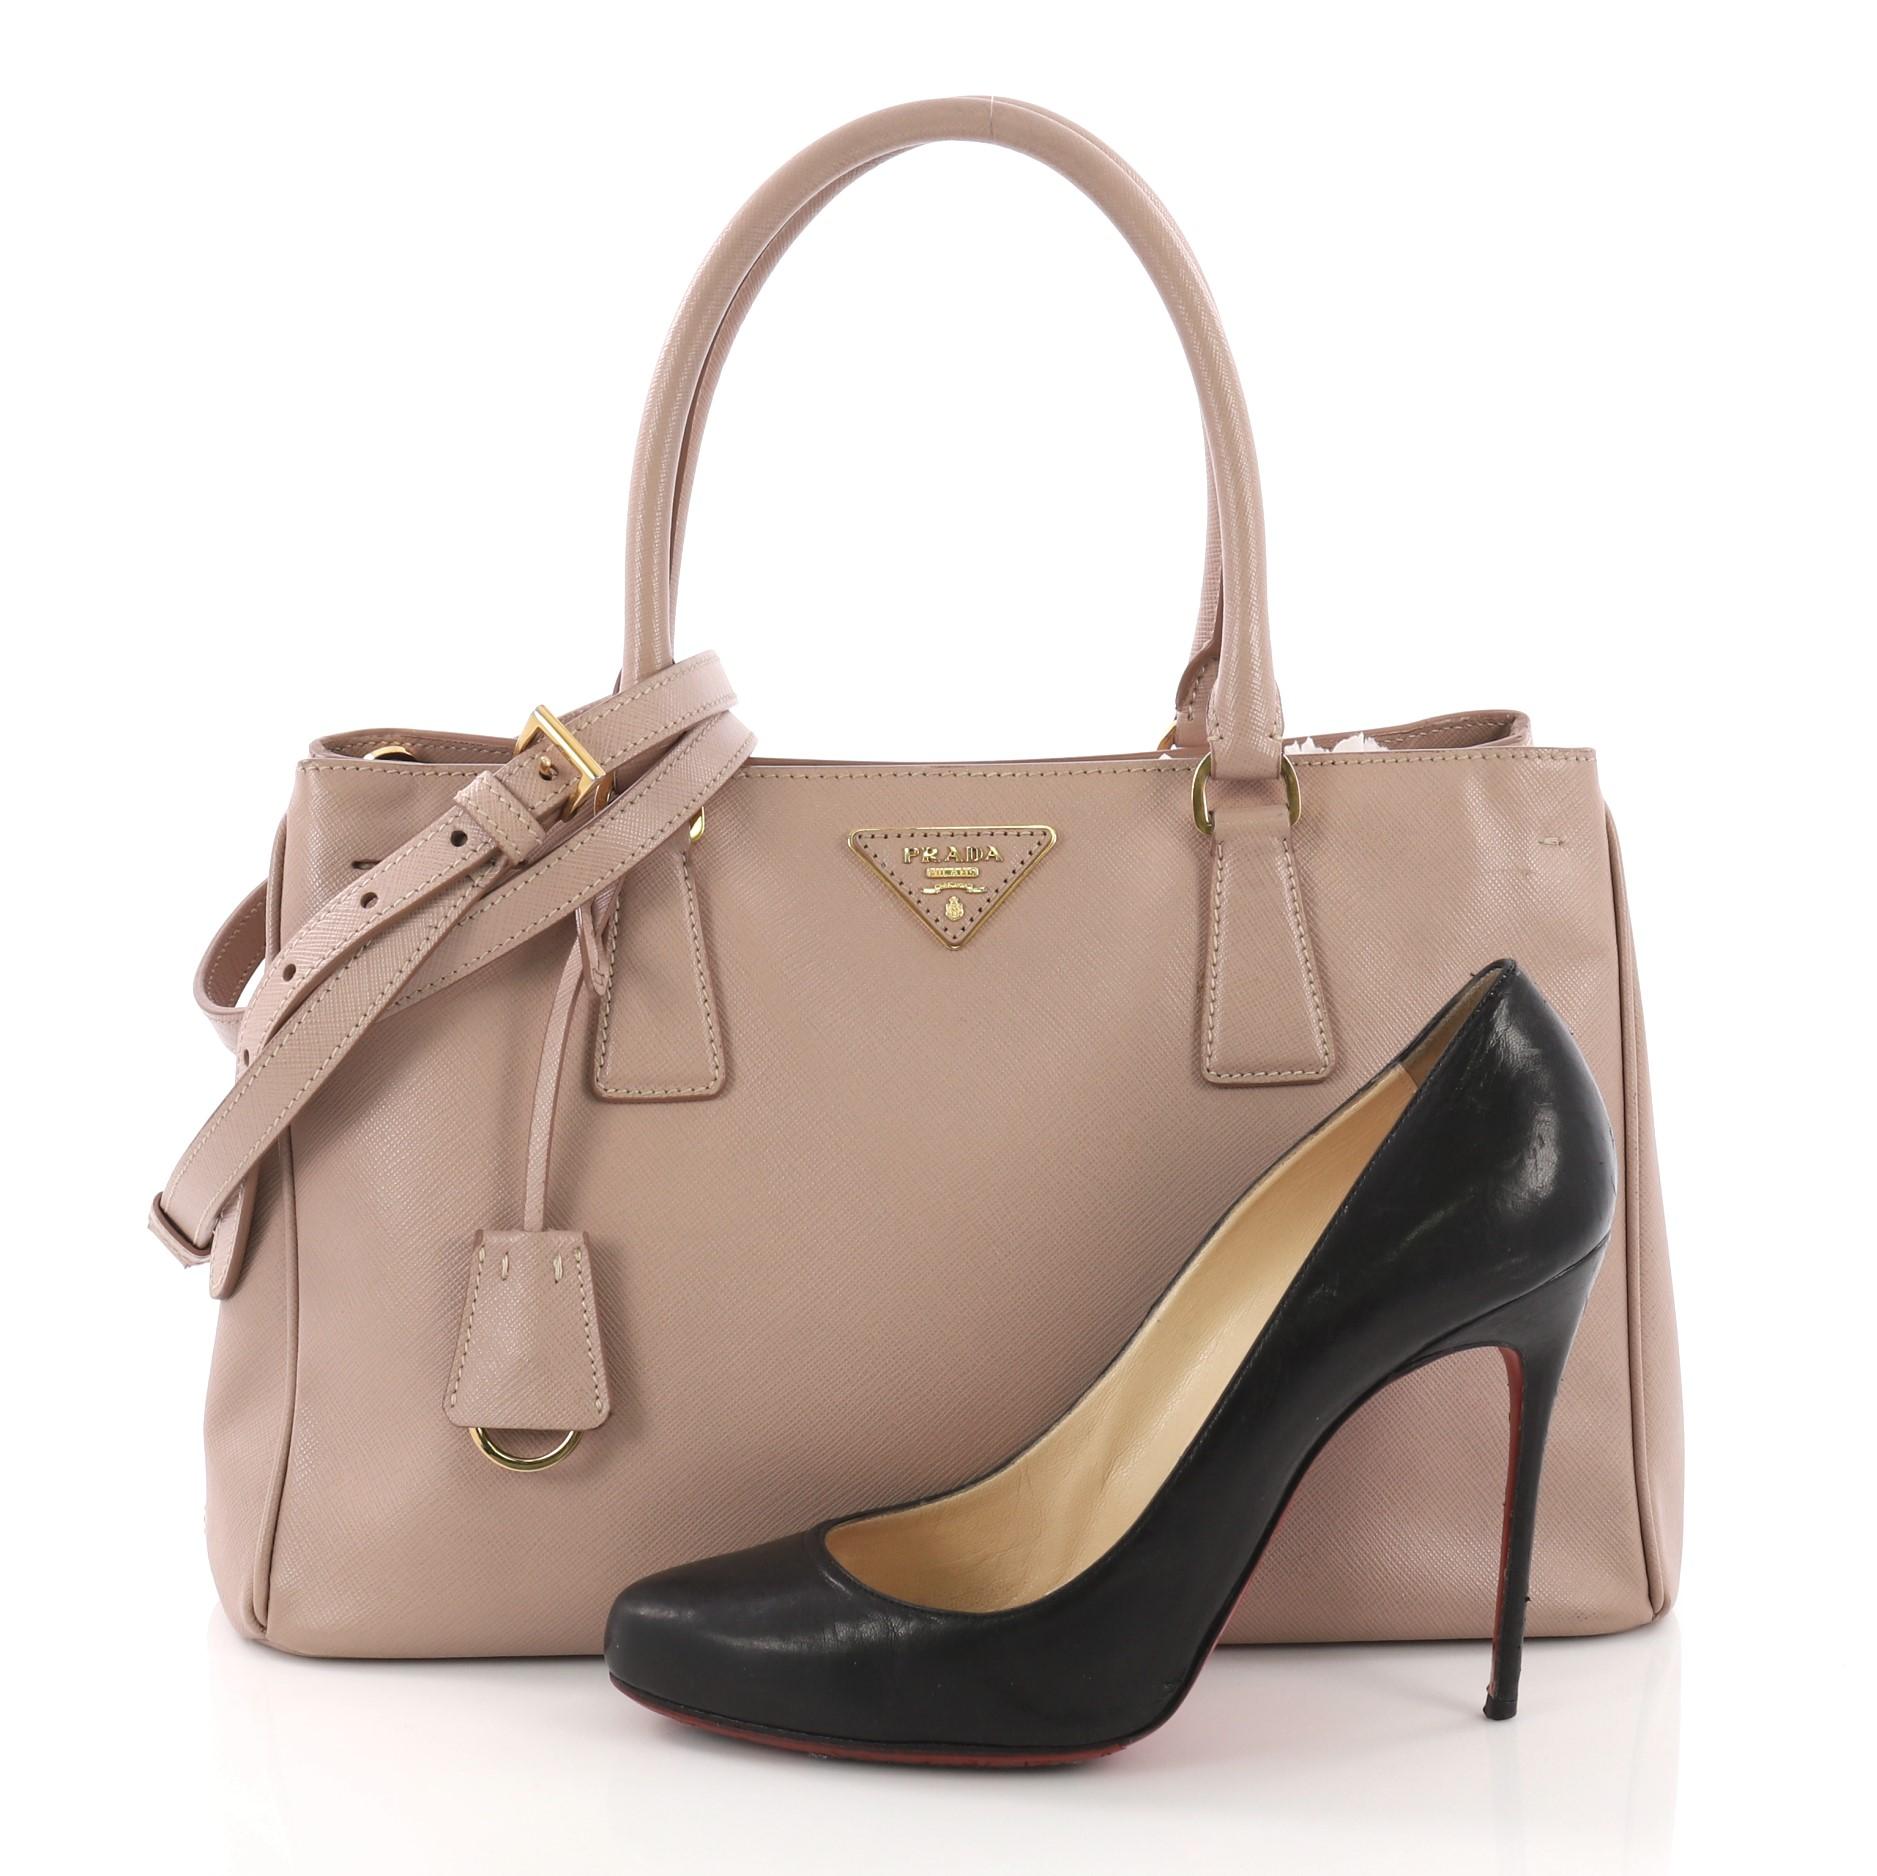 This Prada Double Zip Lux Tote Saffiano Leather Small, crafted from pink saffiano leather, features dual rolled handles, raised Prada logo plate, and gold-tone hardware. It opens to a beige fabric interior with two zip compartments on both sides and